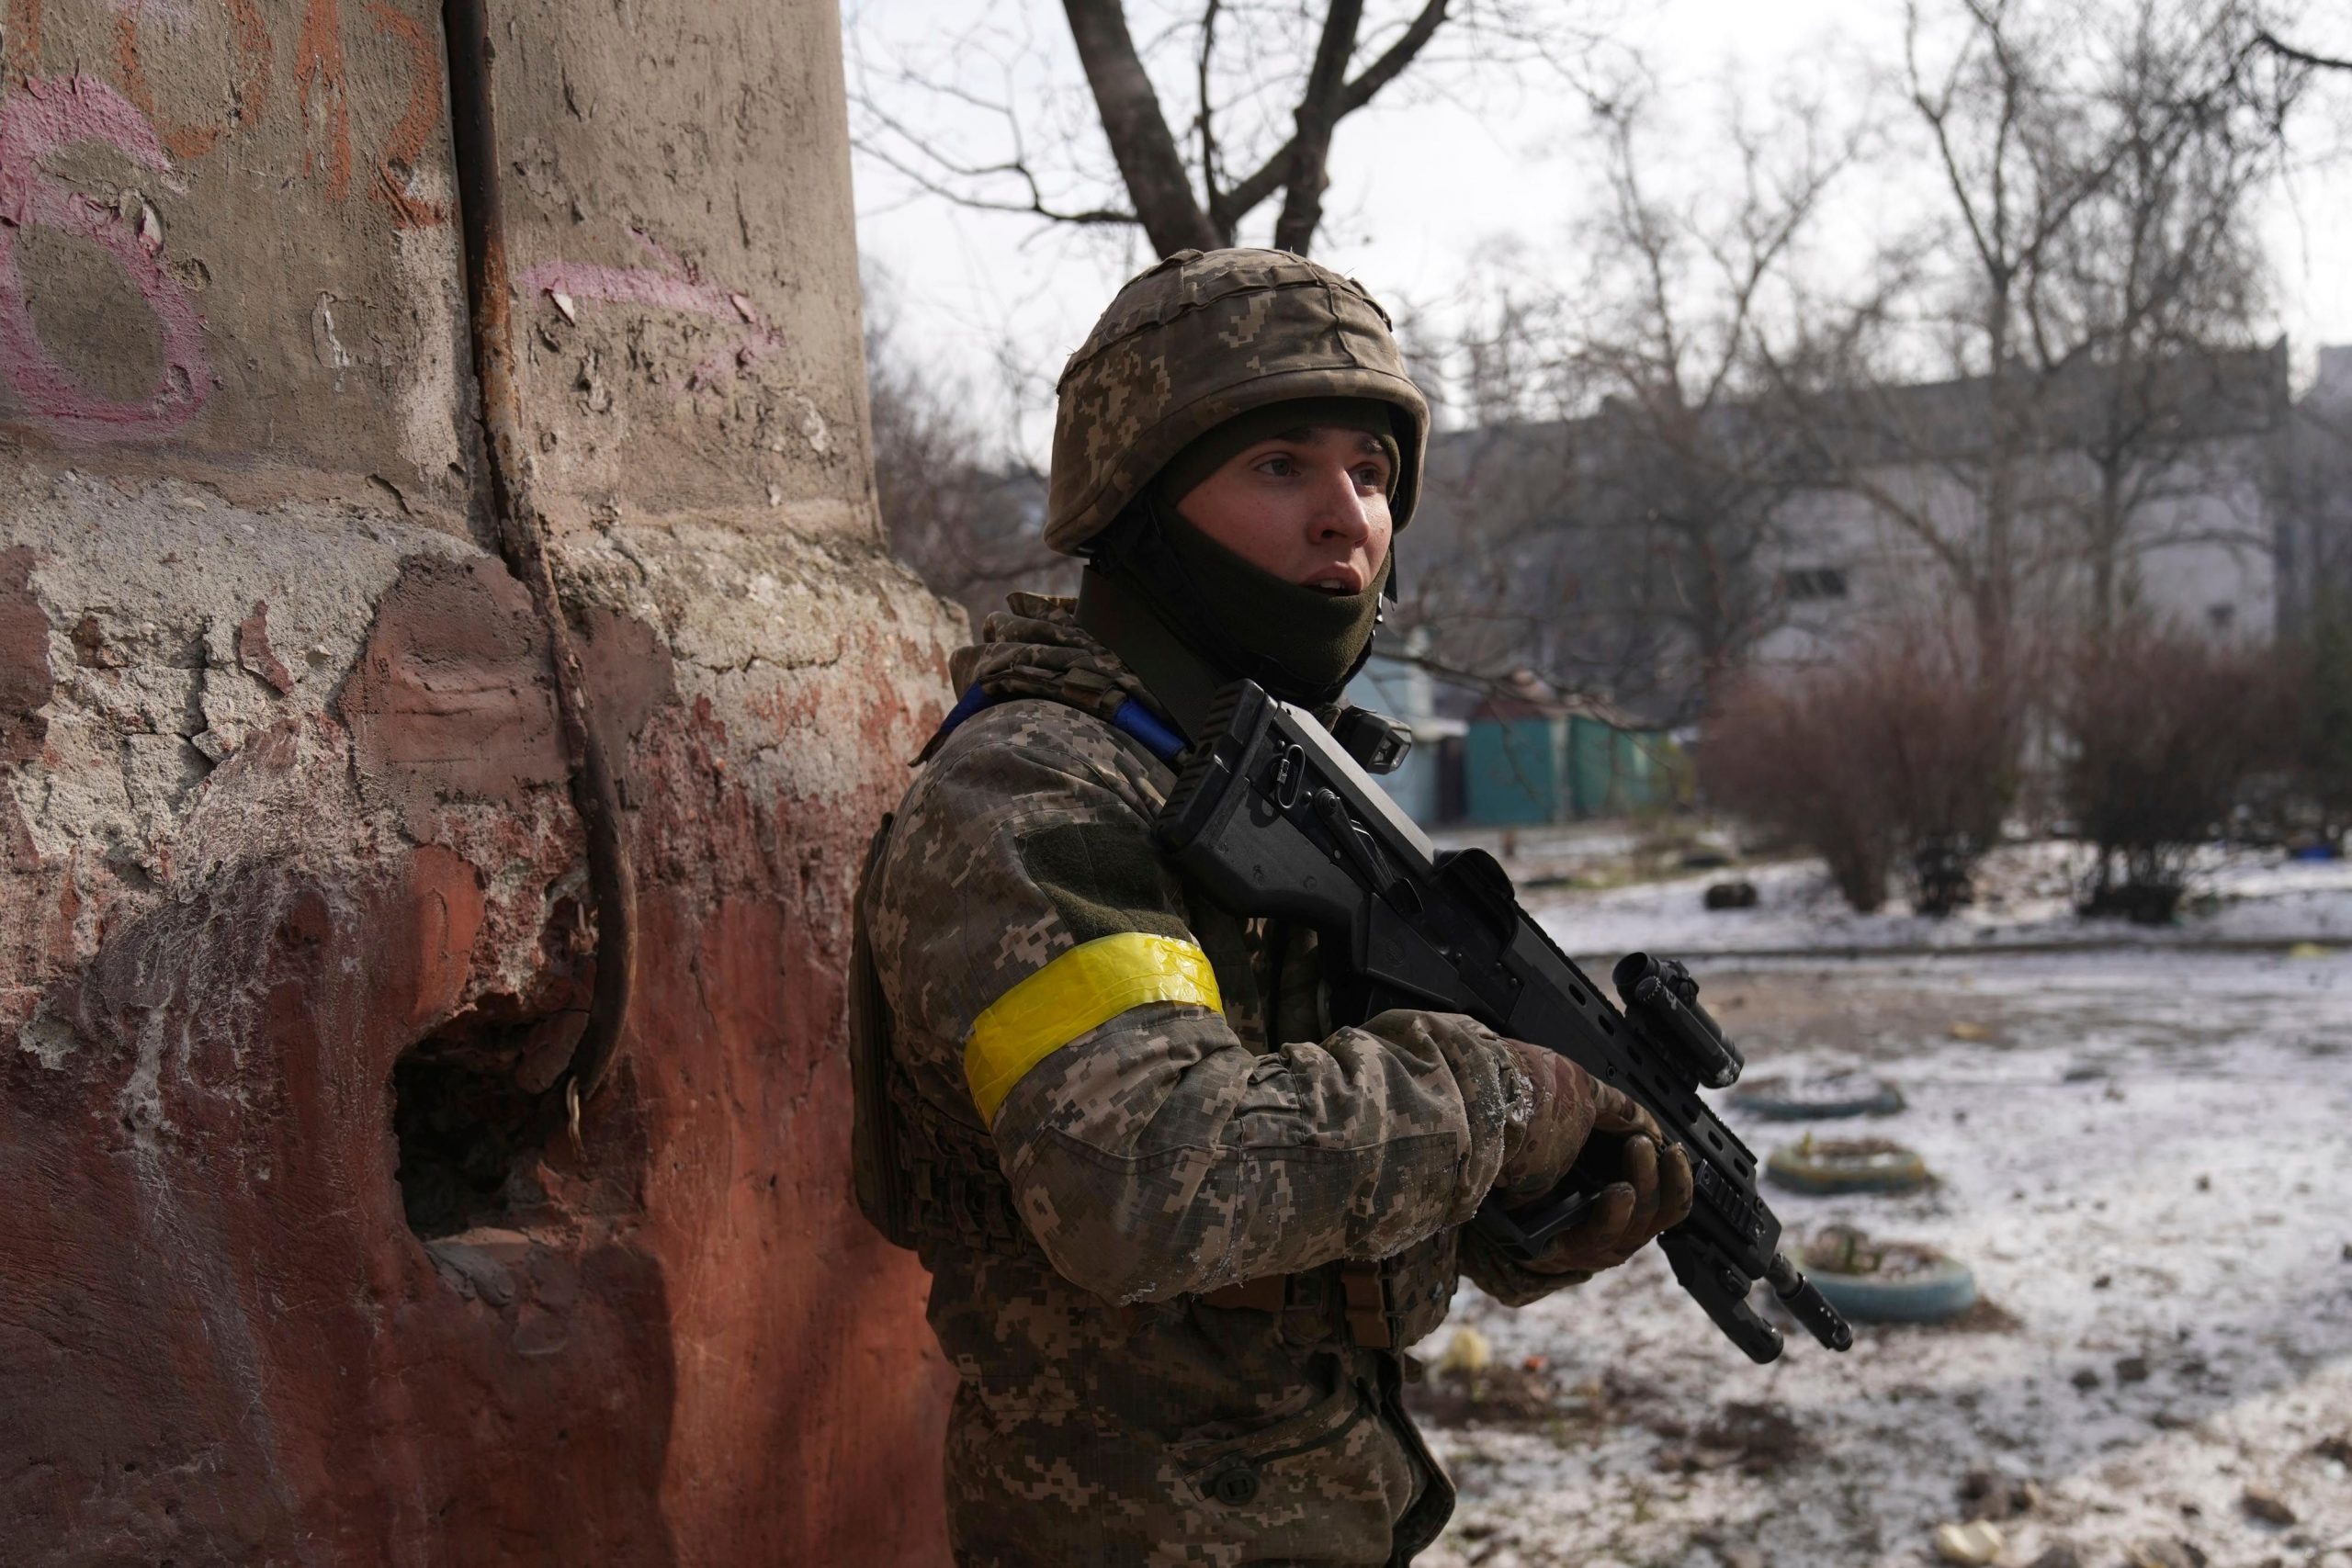 Ukraine rejects Russia’s proposal of demilitarization and neutrality